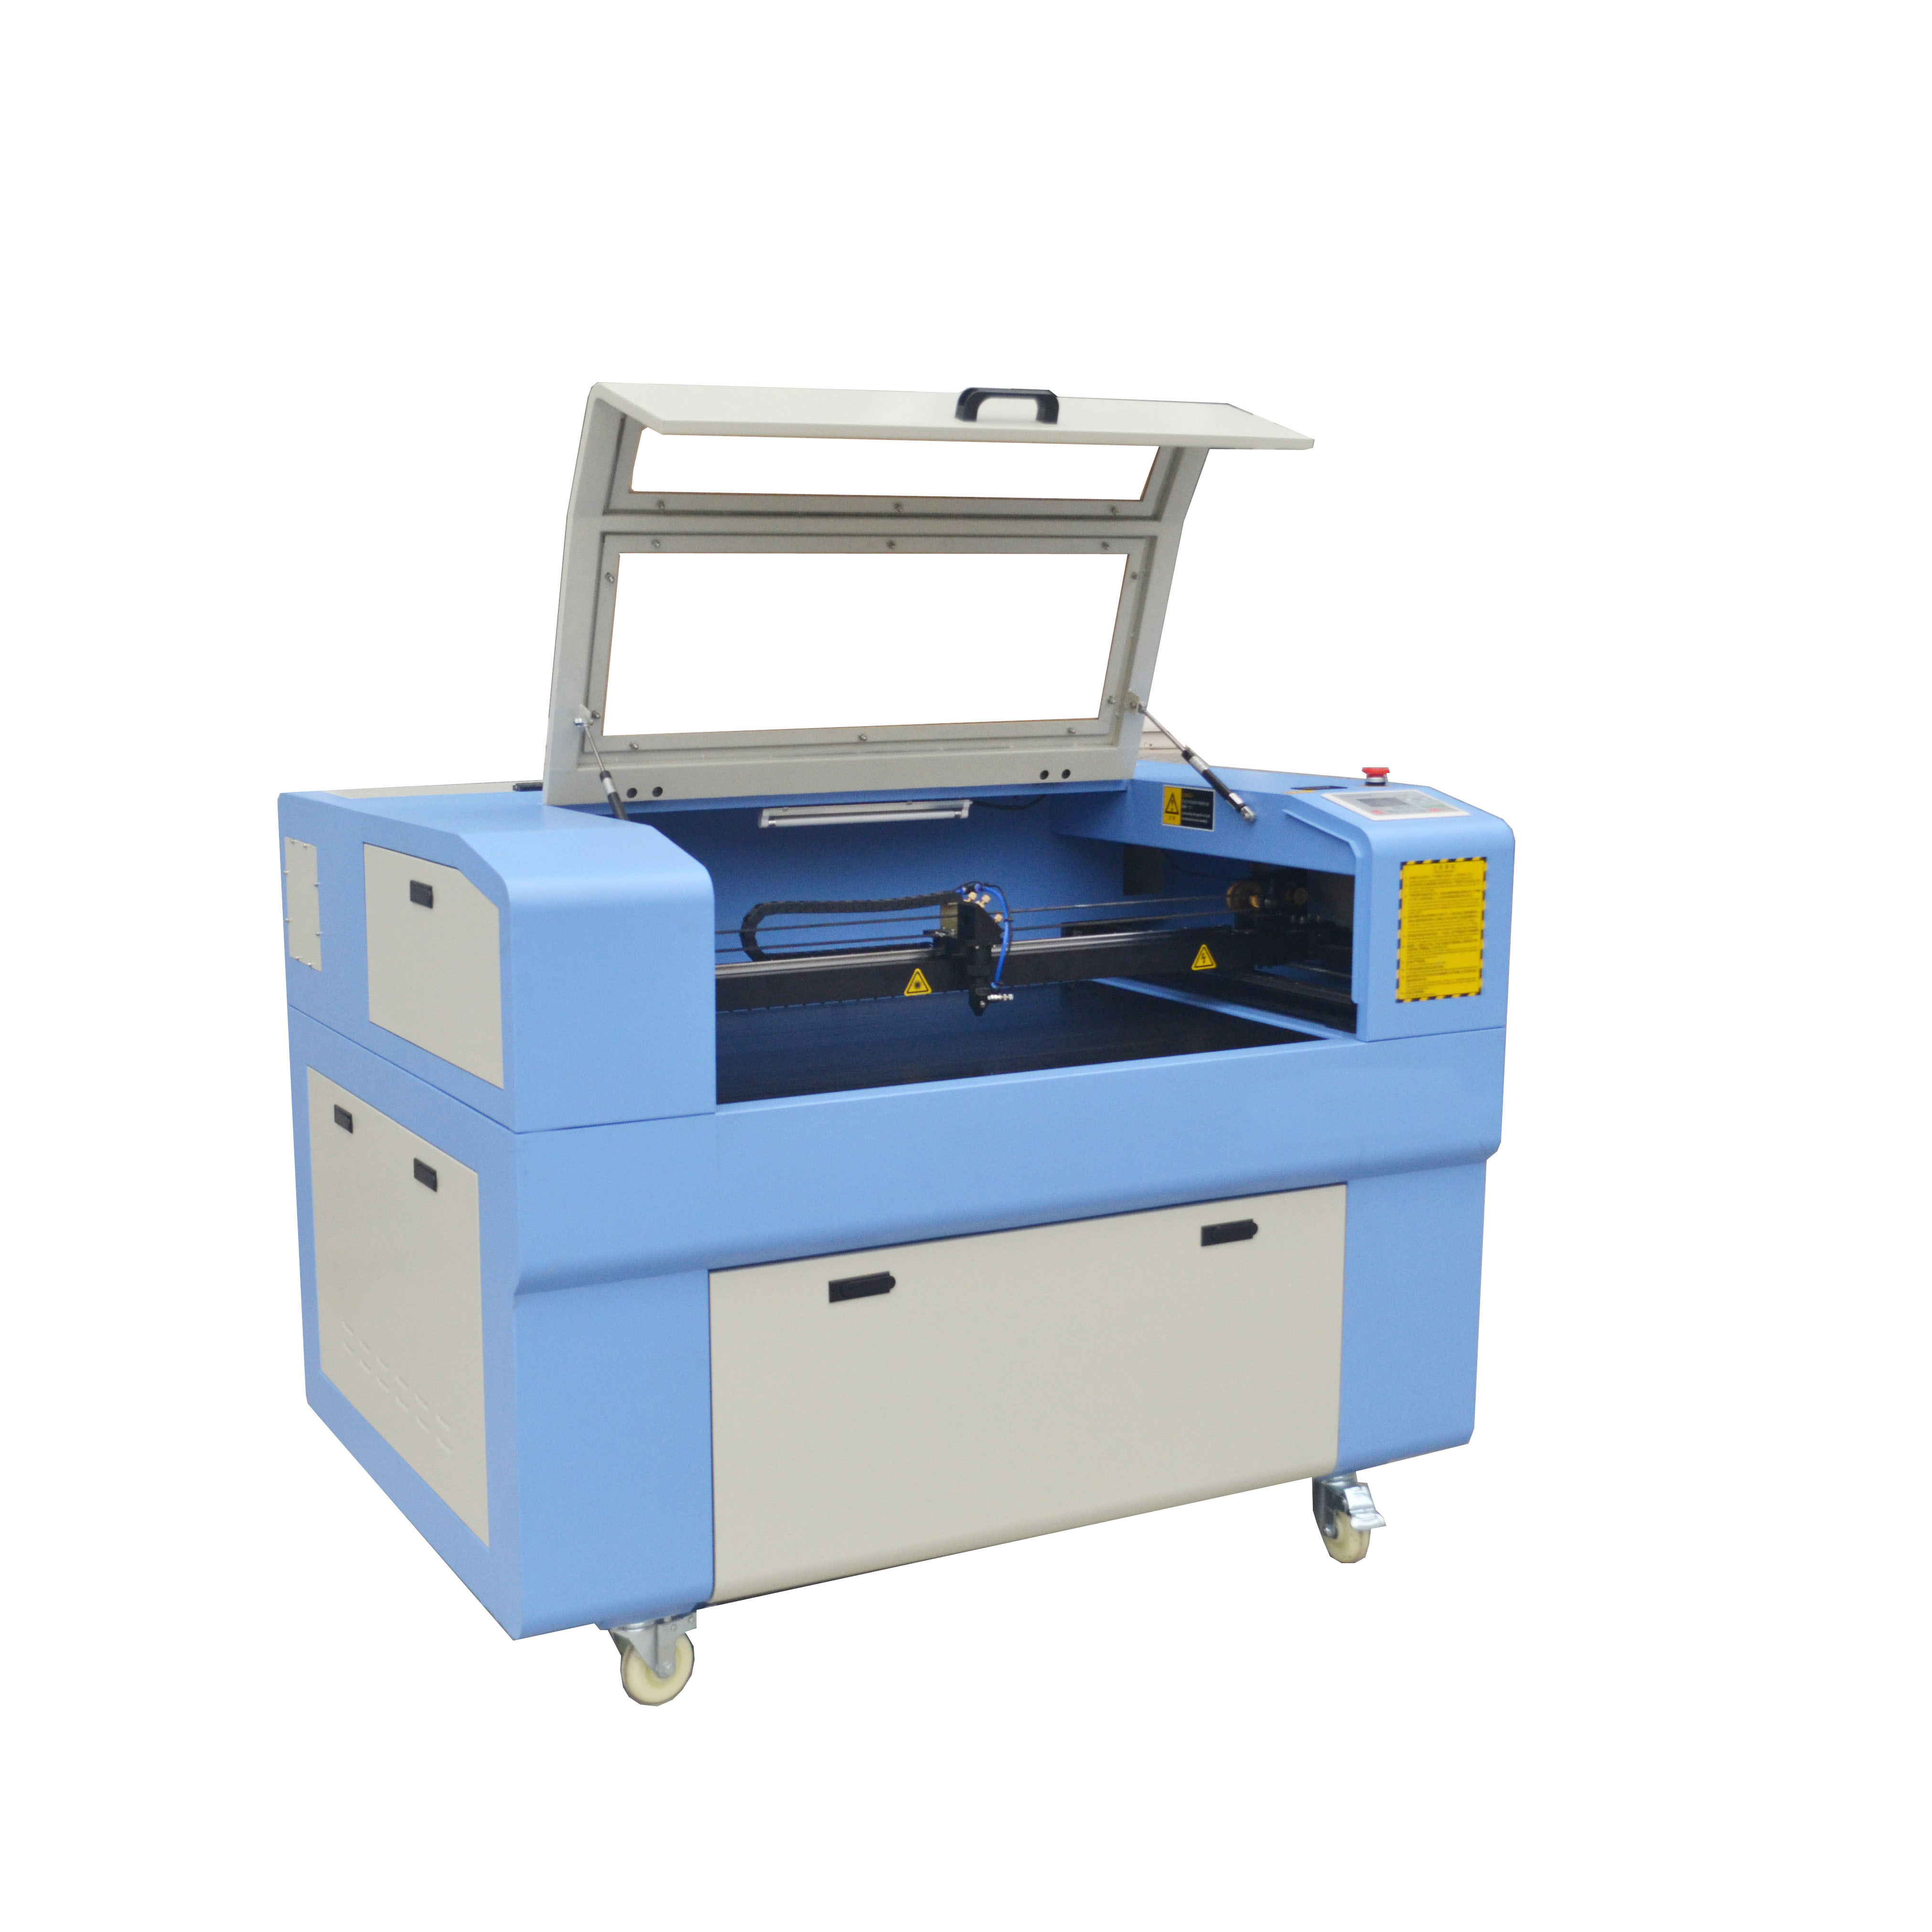 China 6090 960 CO2 Laser Engraving Cutting Machine Rdcam Control CE factory